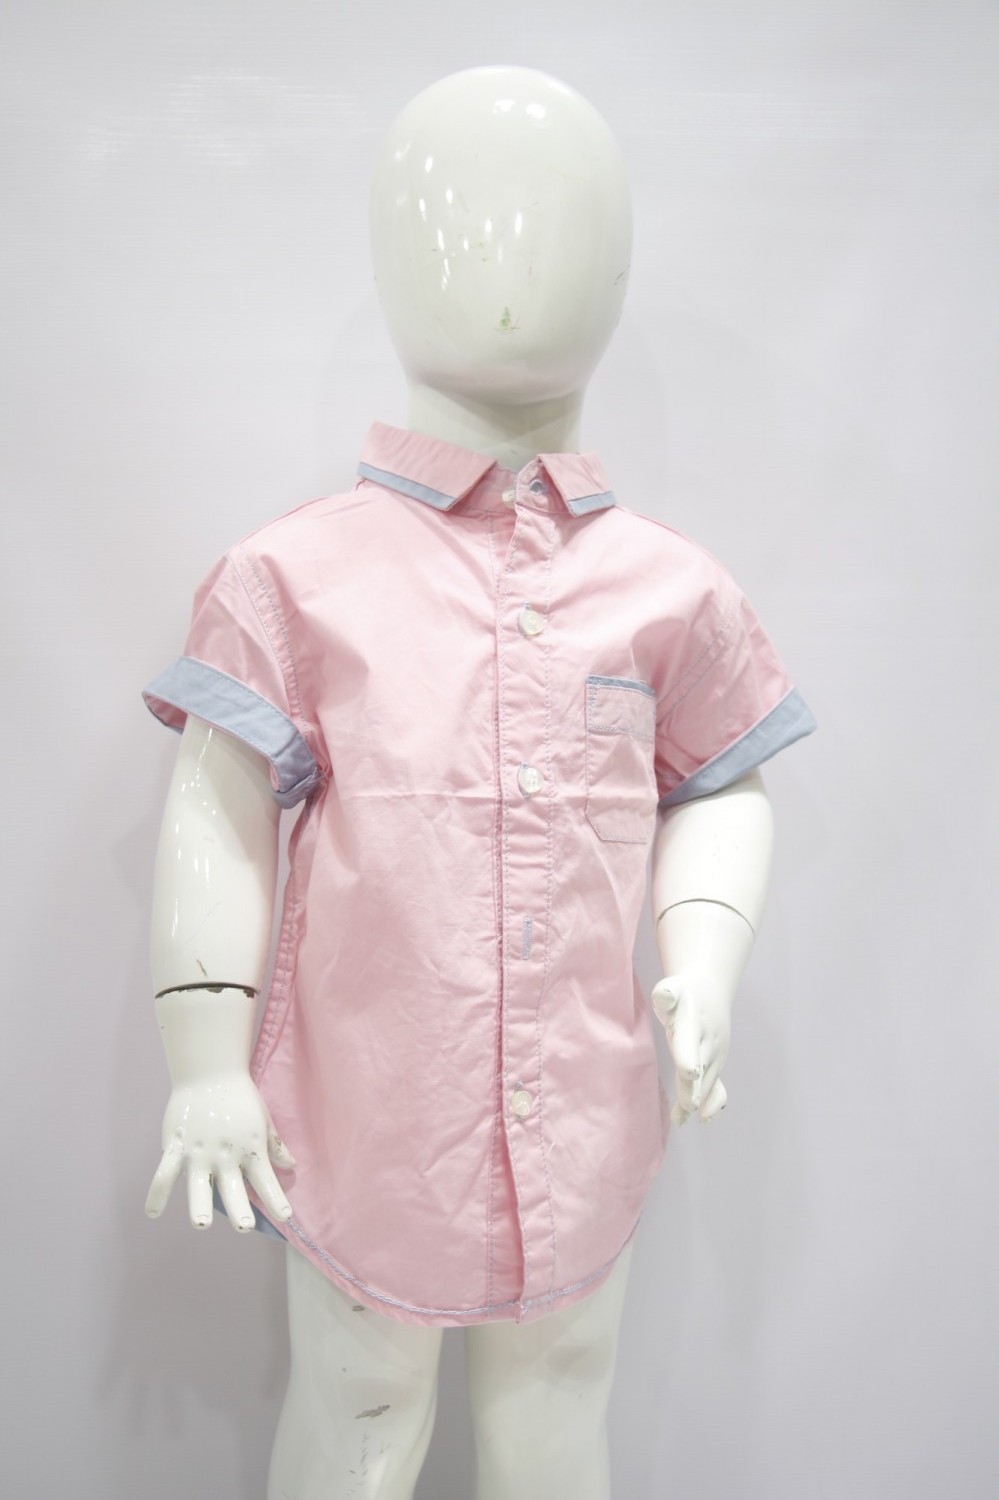 New Design Half Shirts - Buy Baby Clothes Online Nepal